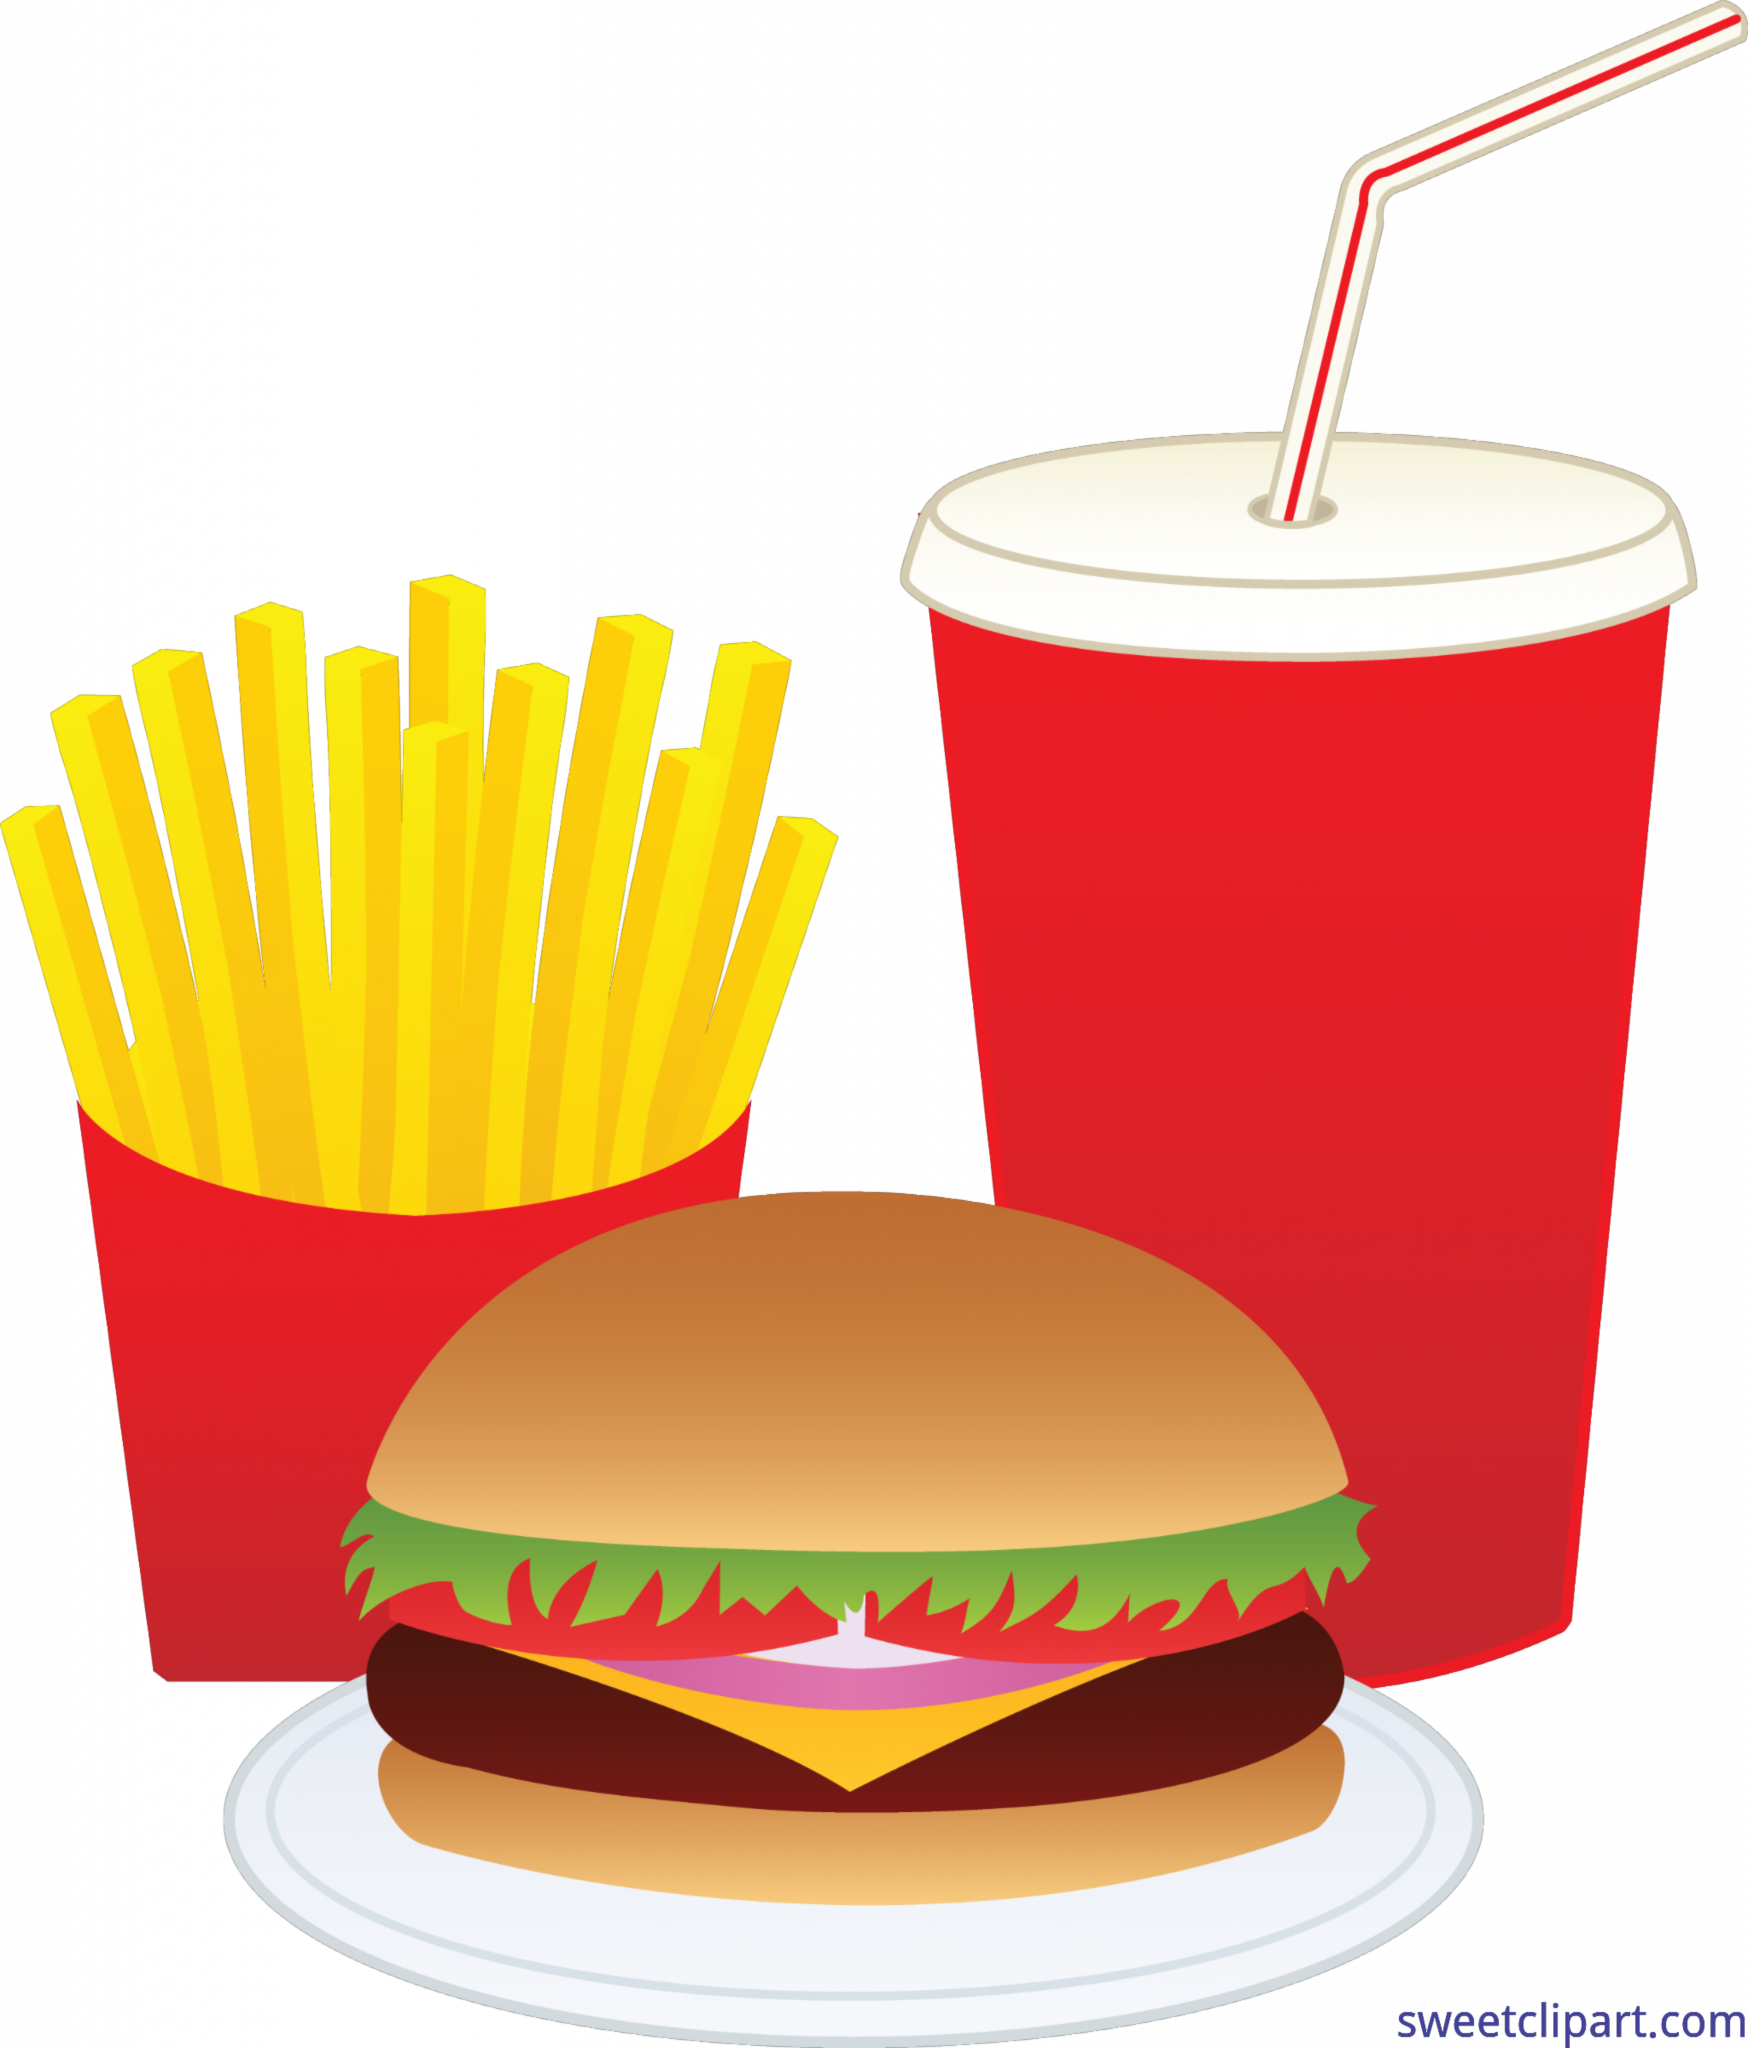 Fast Food Meal Clip Art.